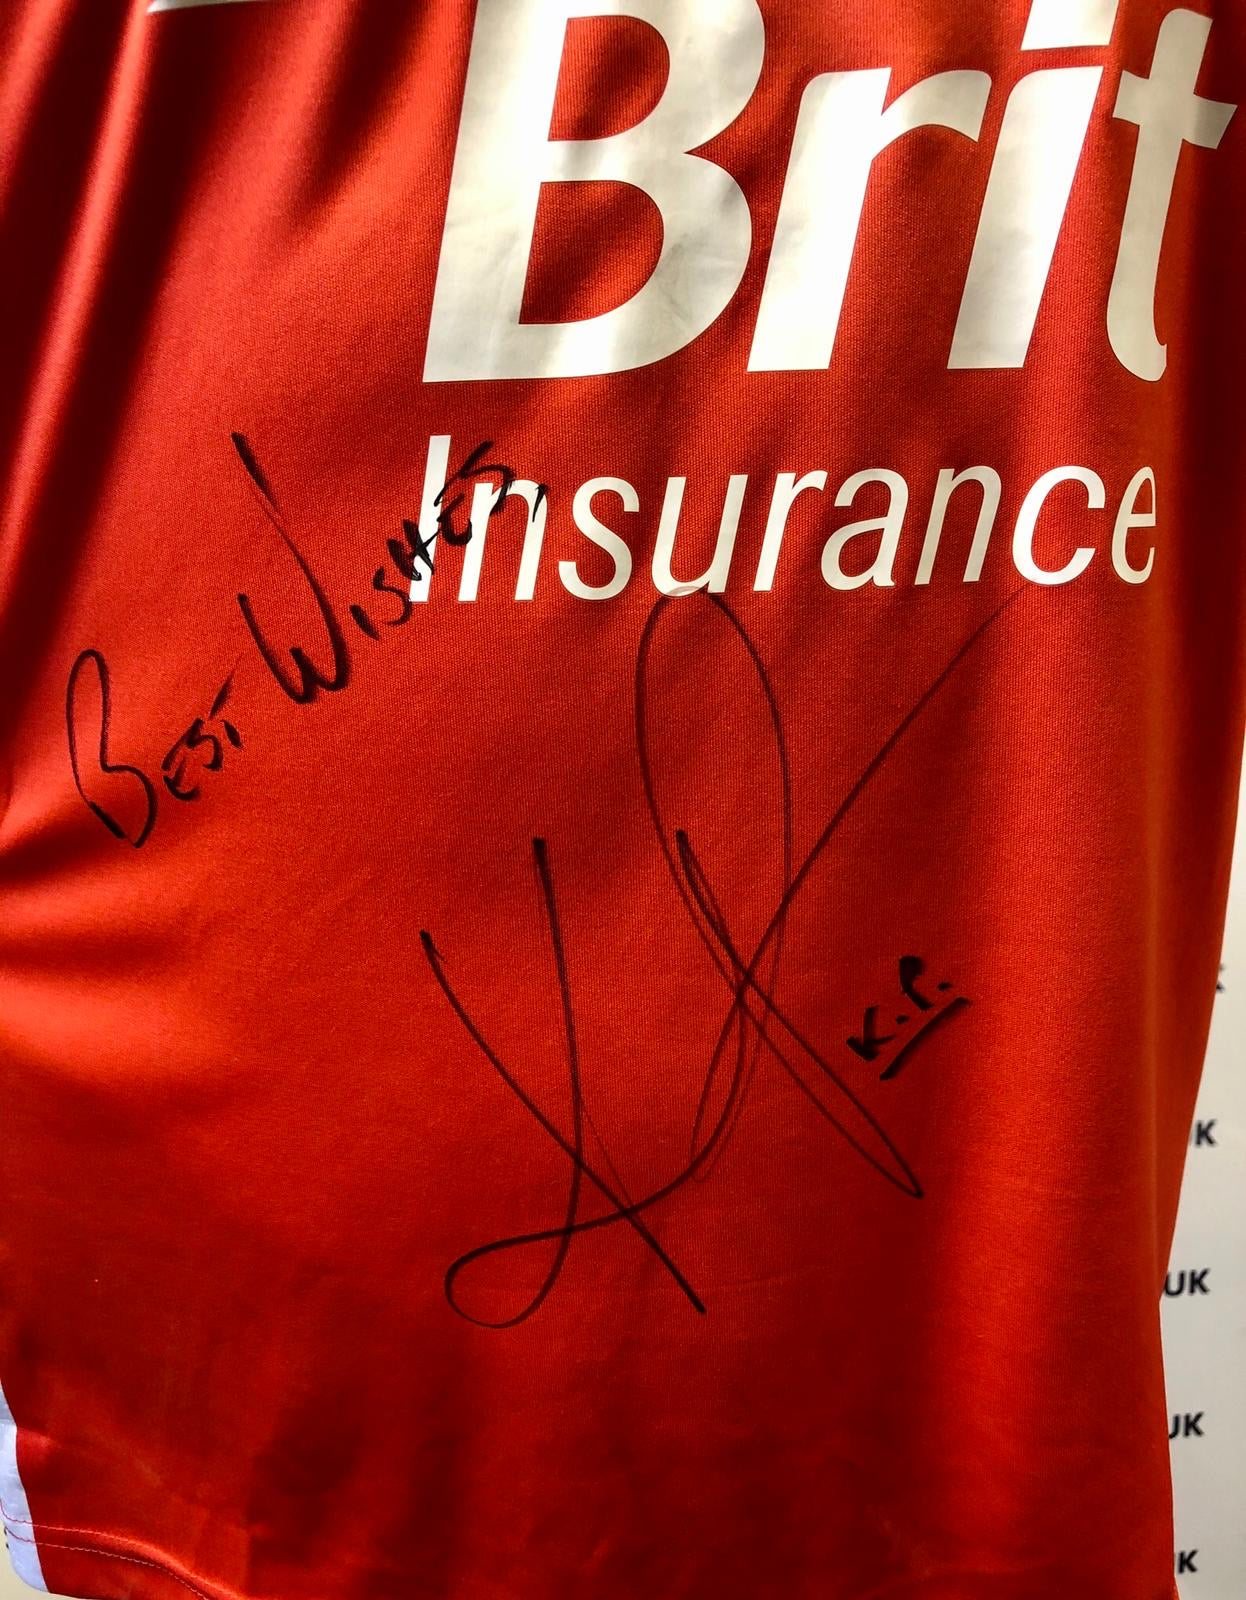 Kevin Pietersen signed England warm up top